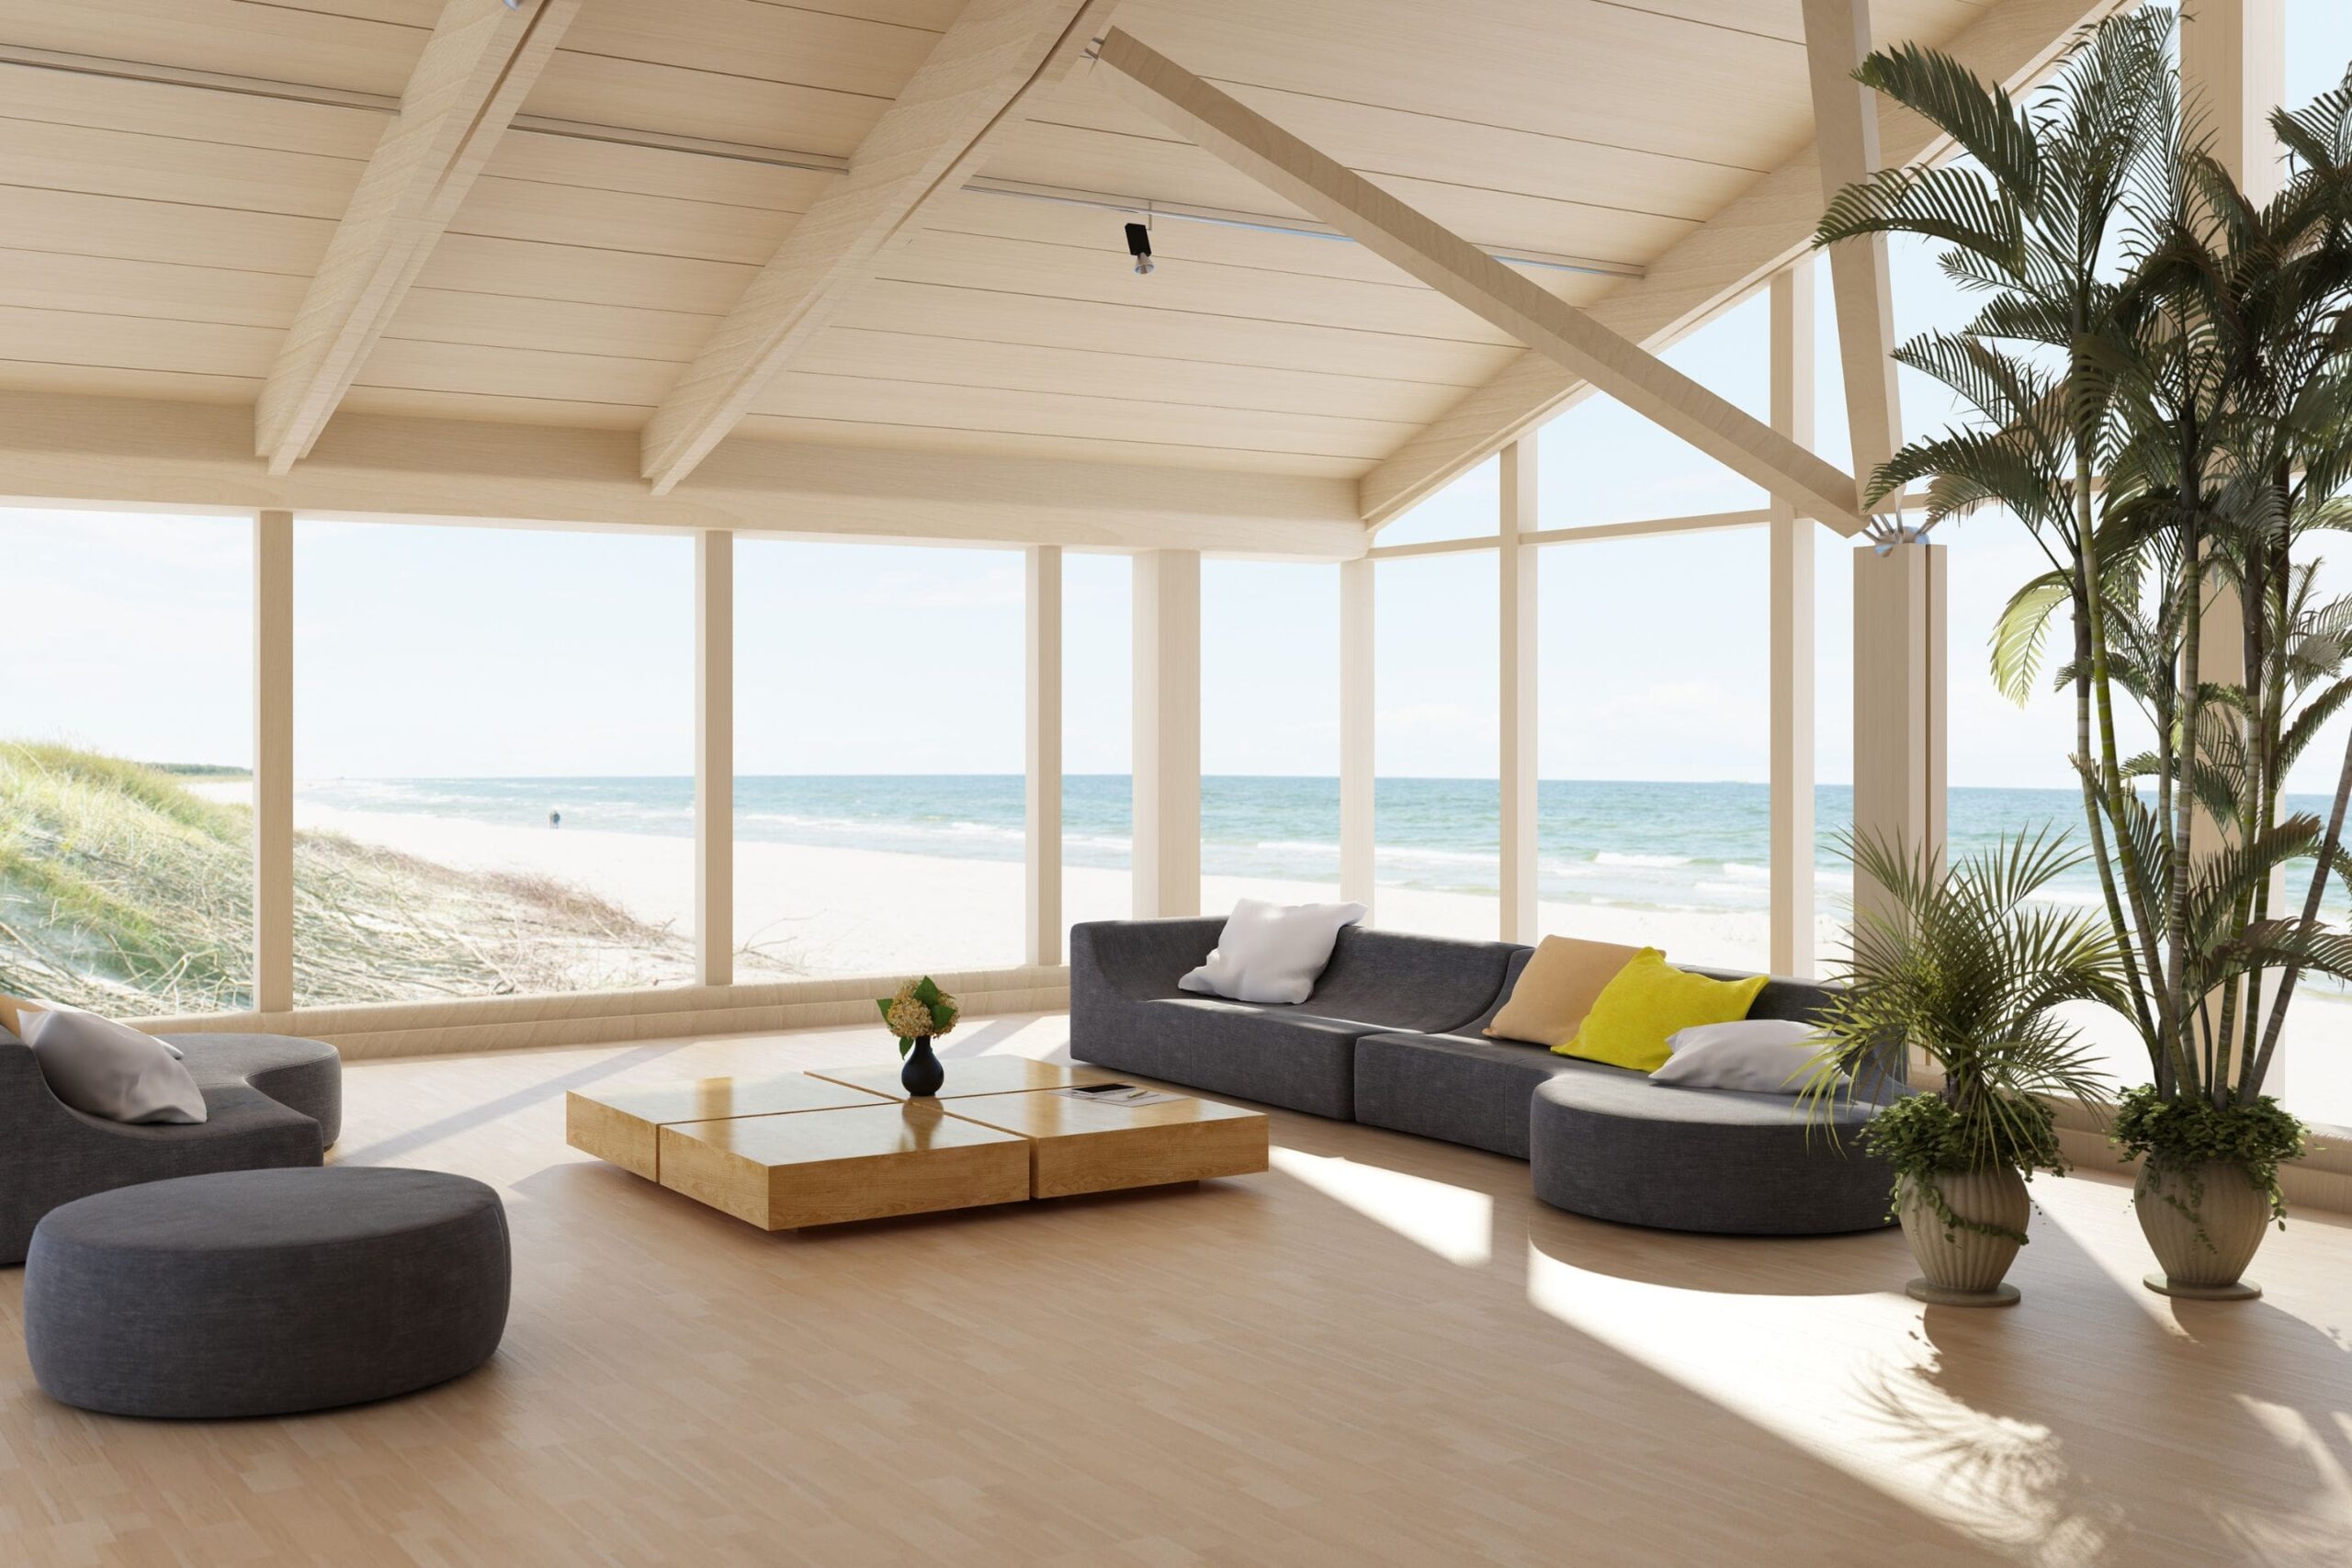 beachfront covered patio with floor to ceiling windows to take in the view